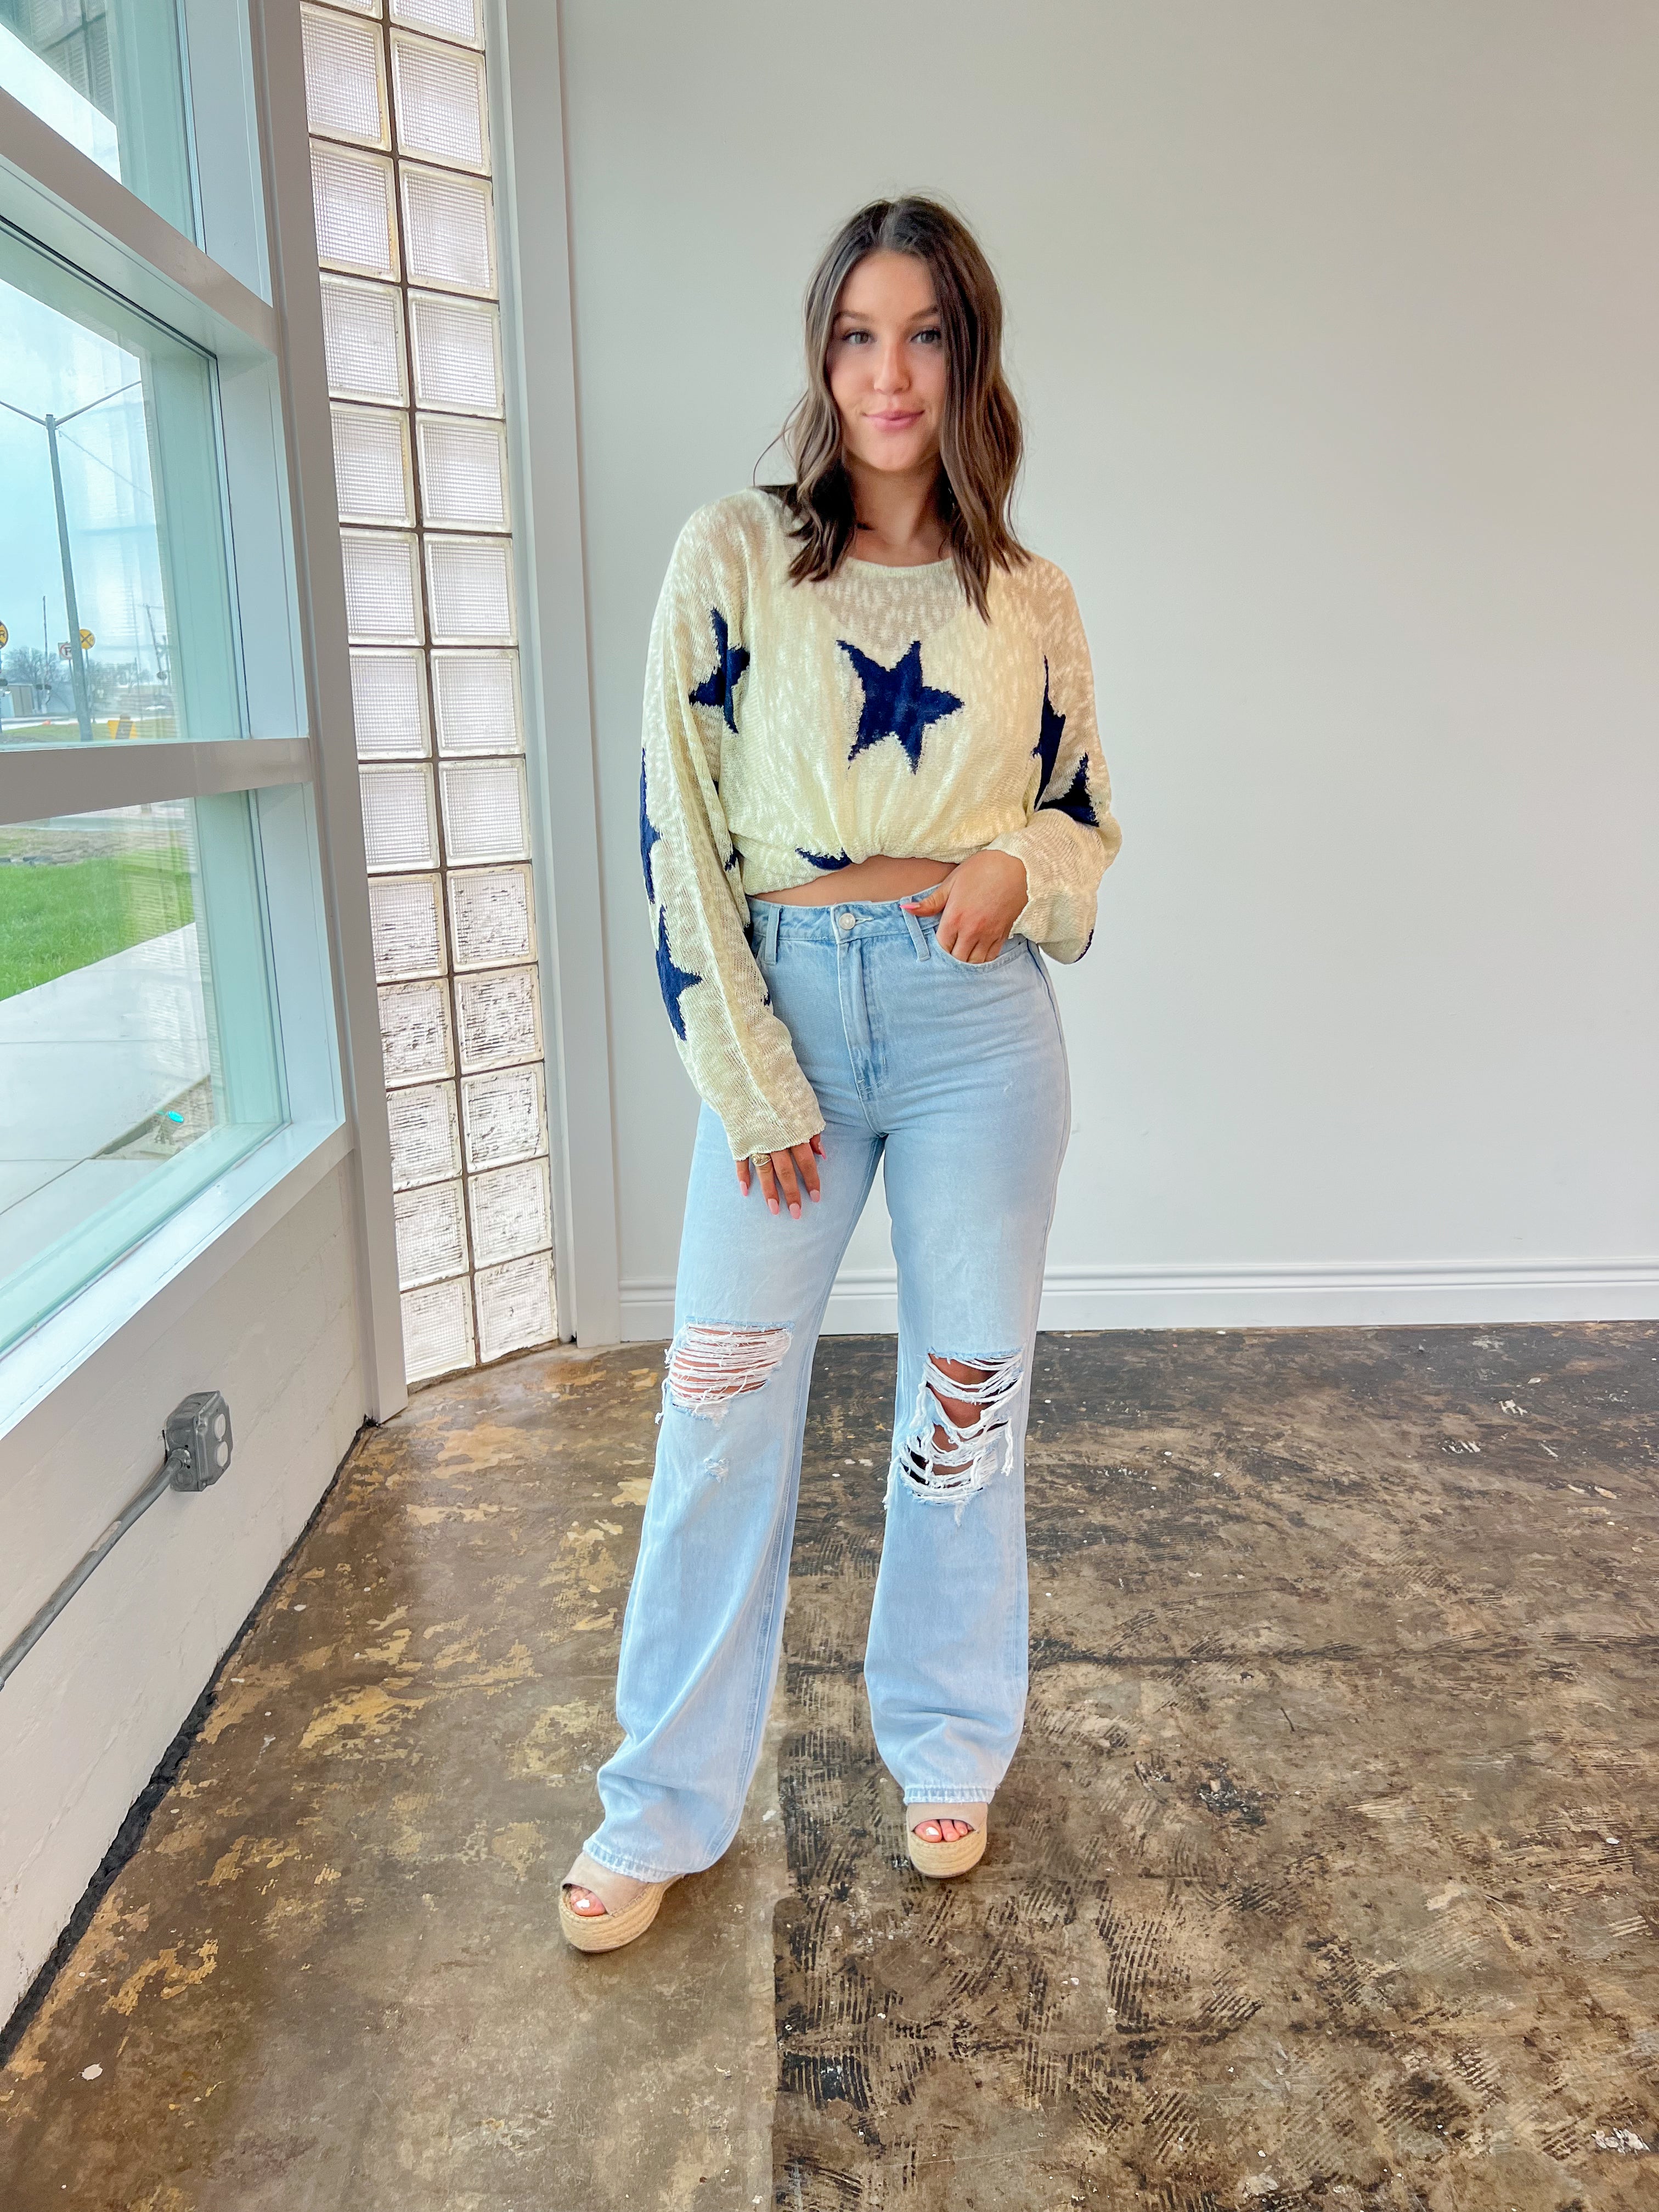 Star Spangled Sweater - JD Ranch Boutique